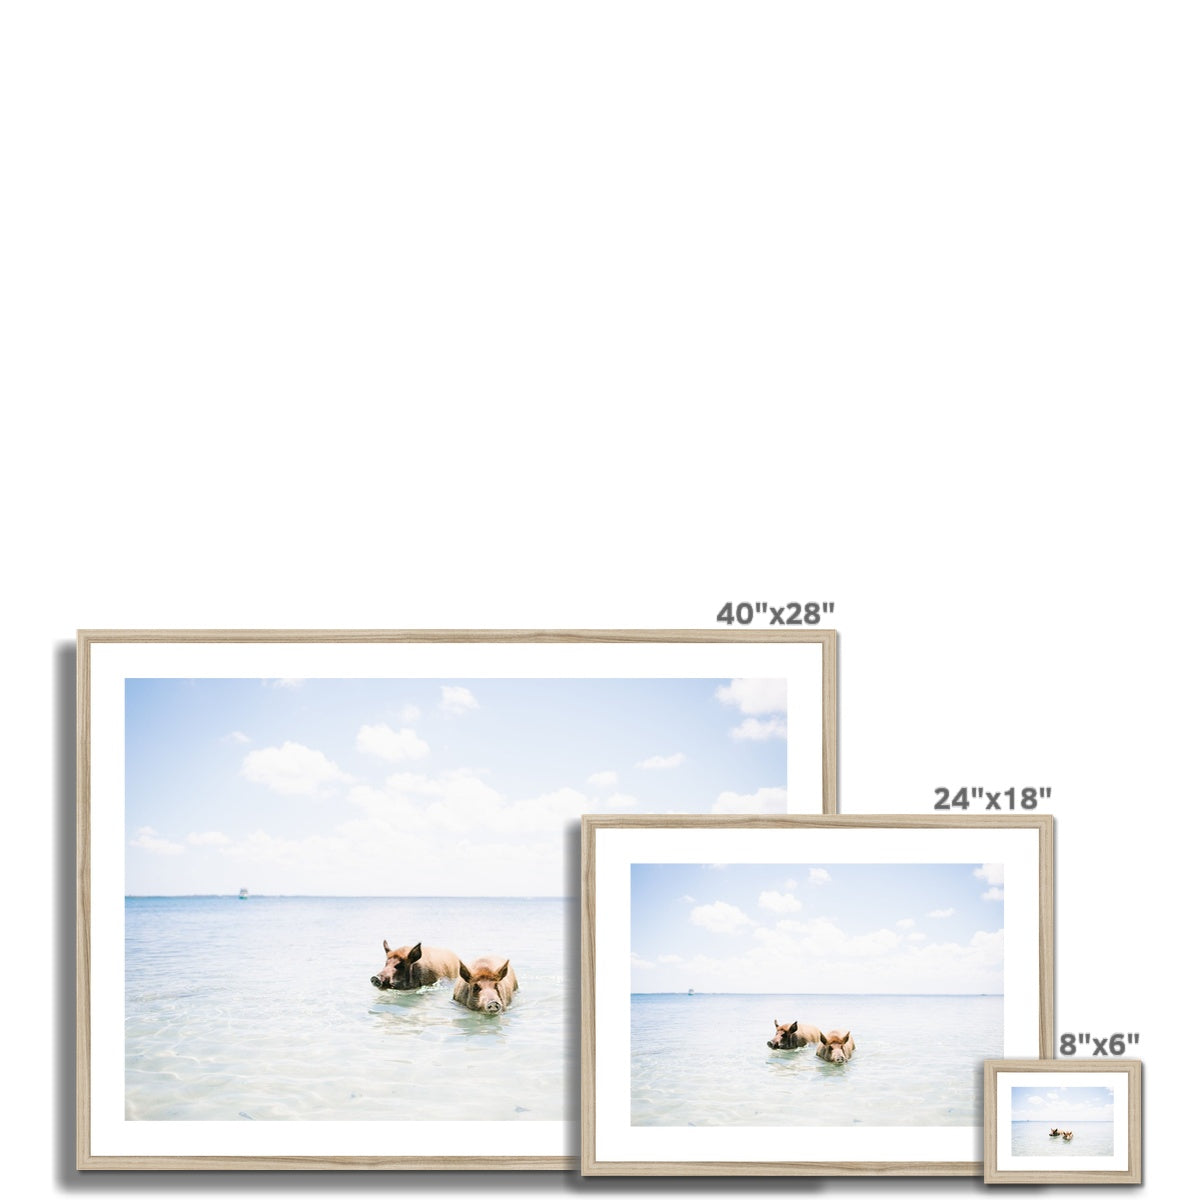 SWIMMING PIGS Framed & Mounted Print